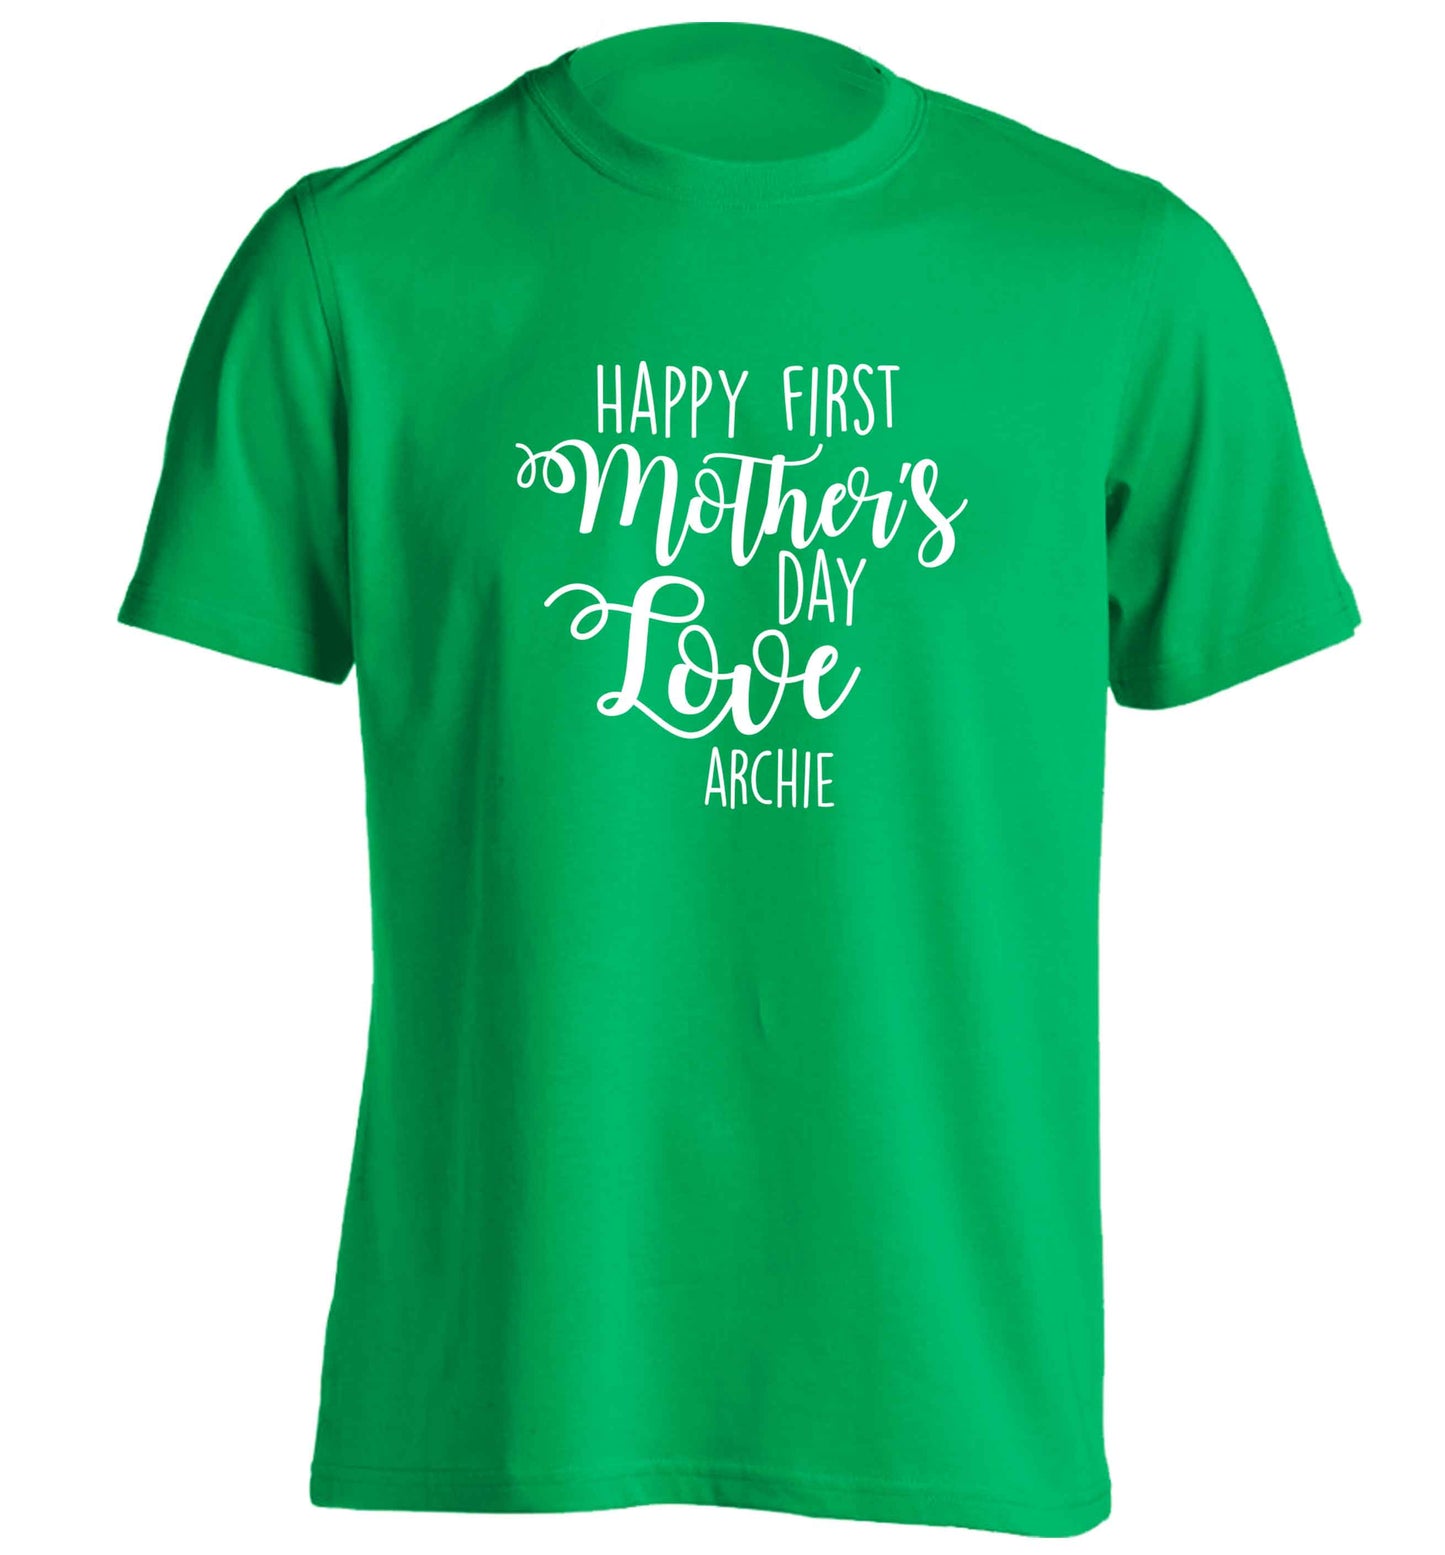 Personalised happy first mother's day love adults unisex green Tshirt 2XL